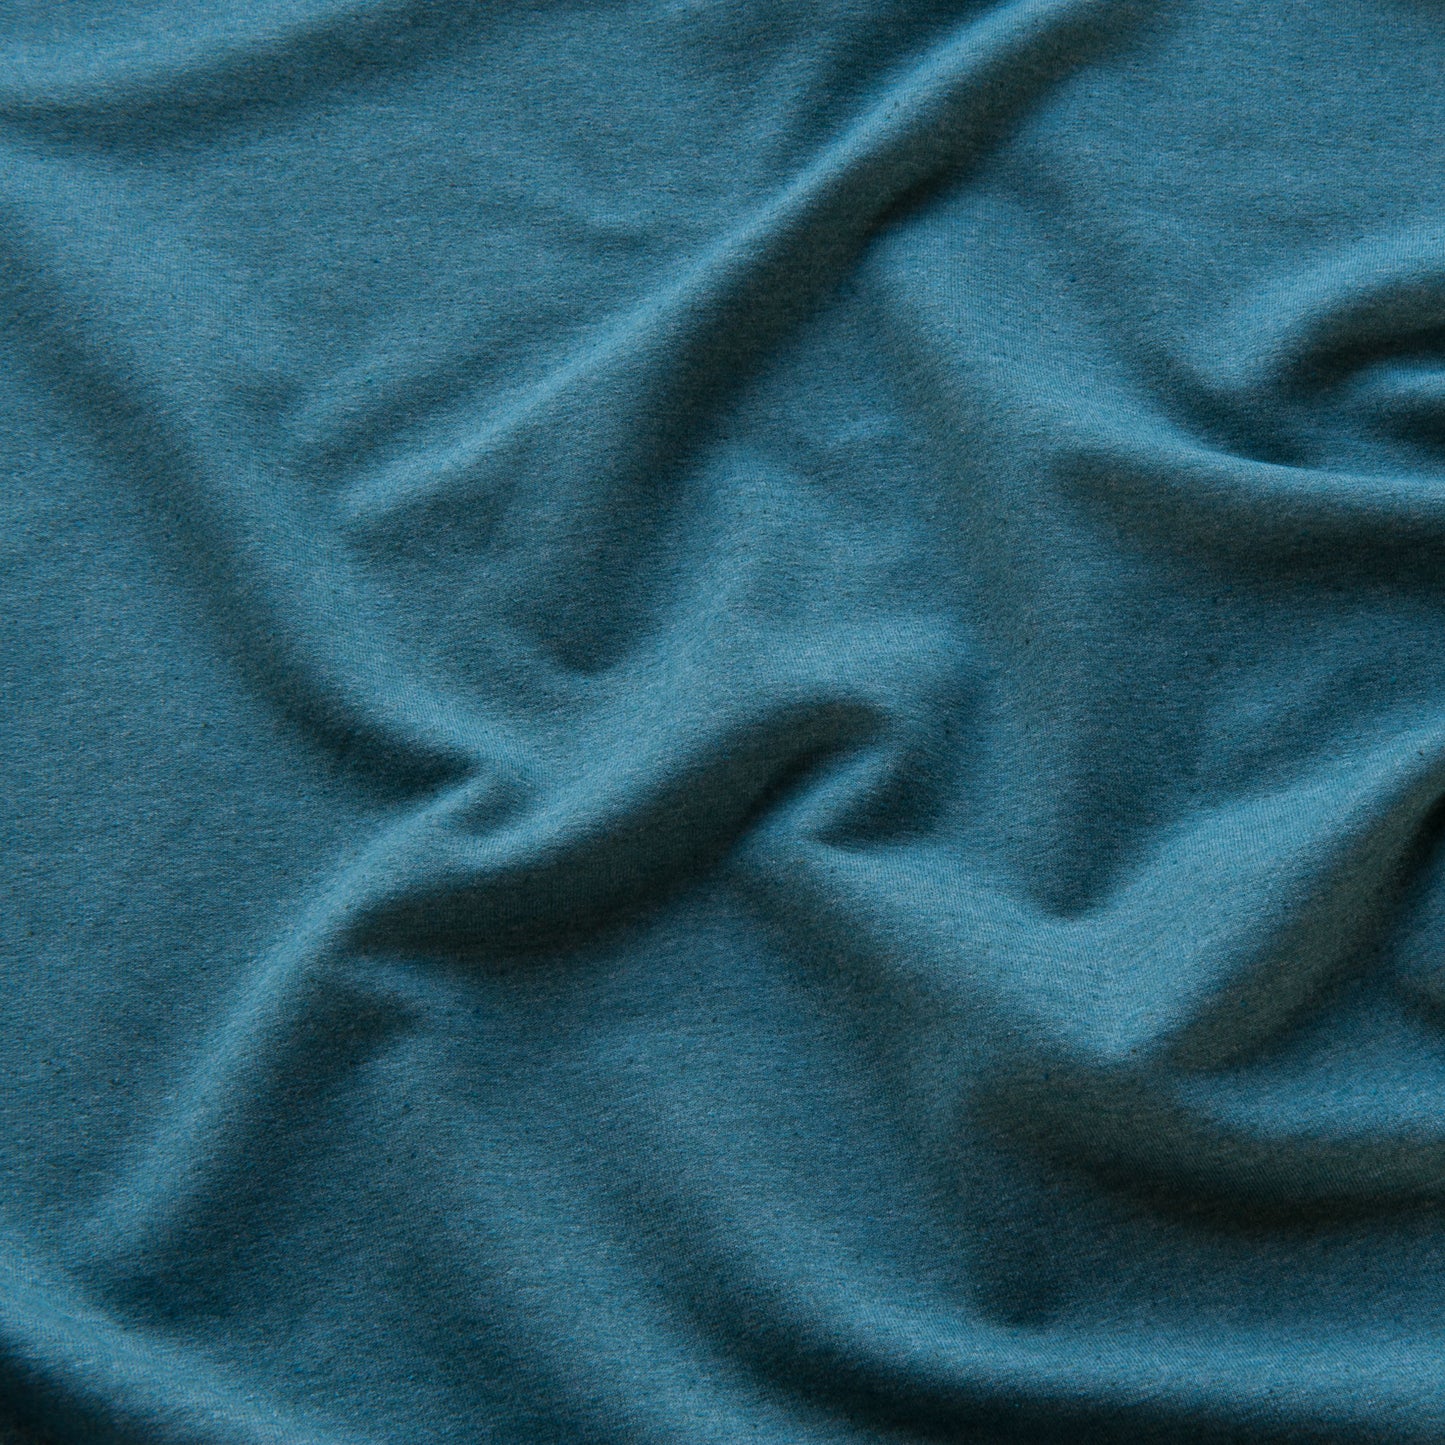 Recycled Cotton Sweatshirt Fabric in Teal